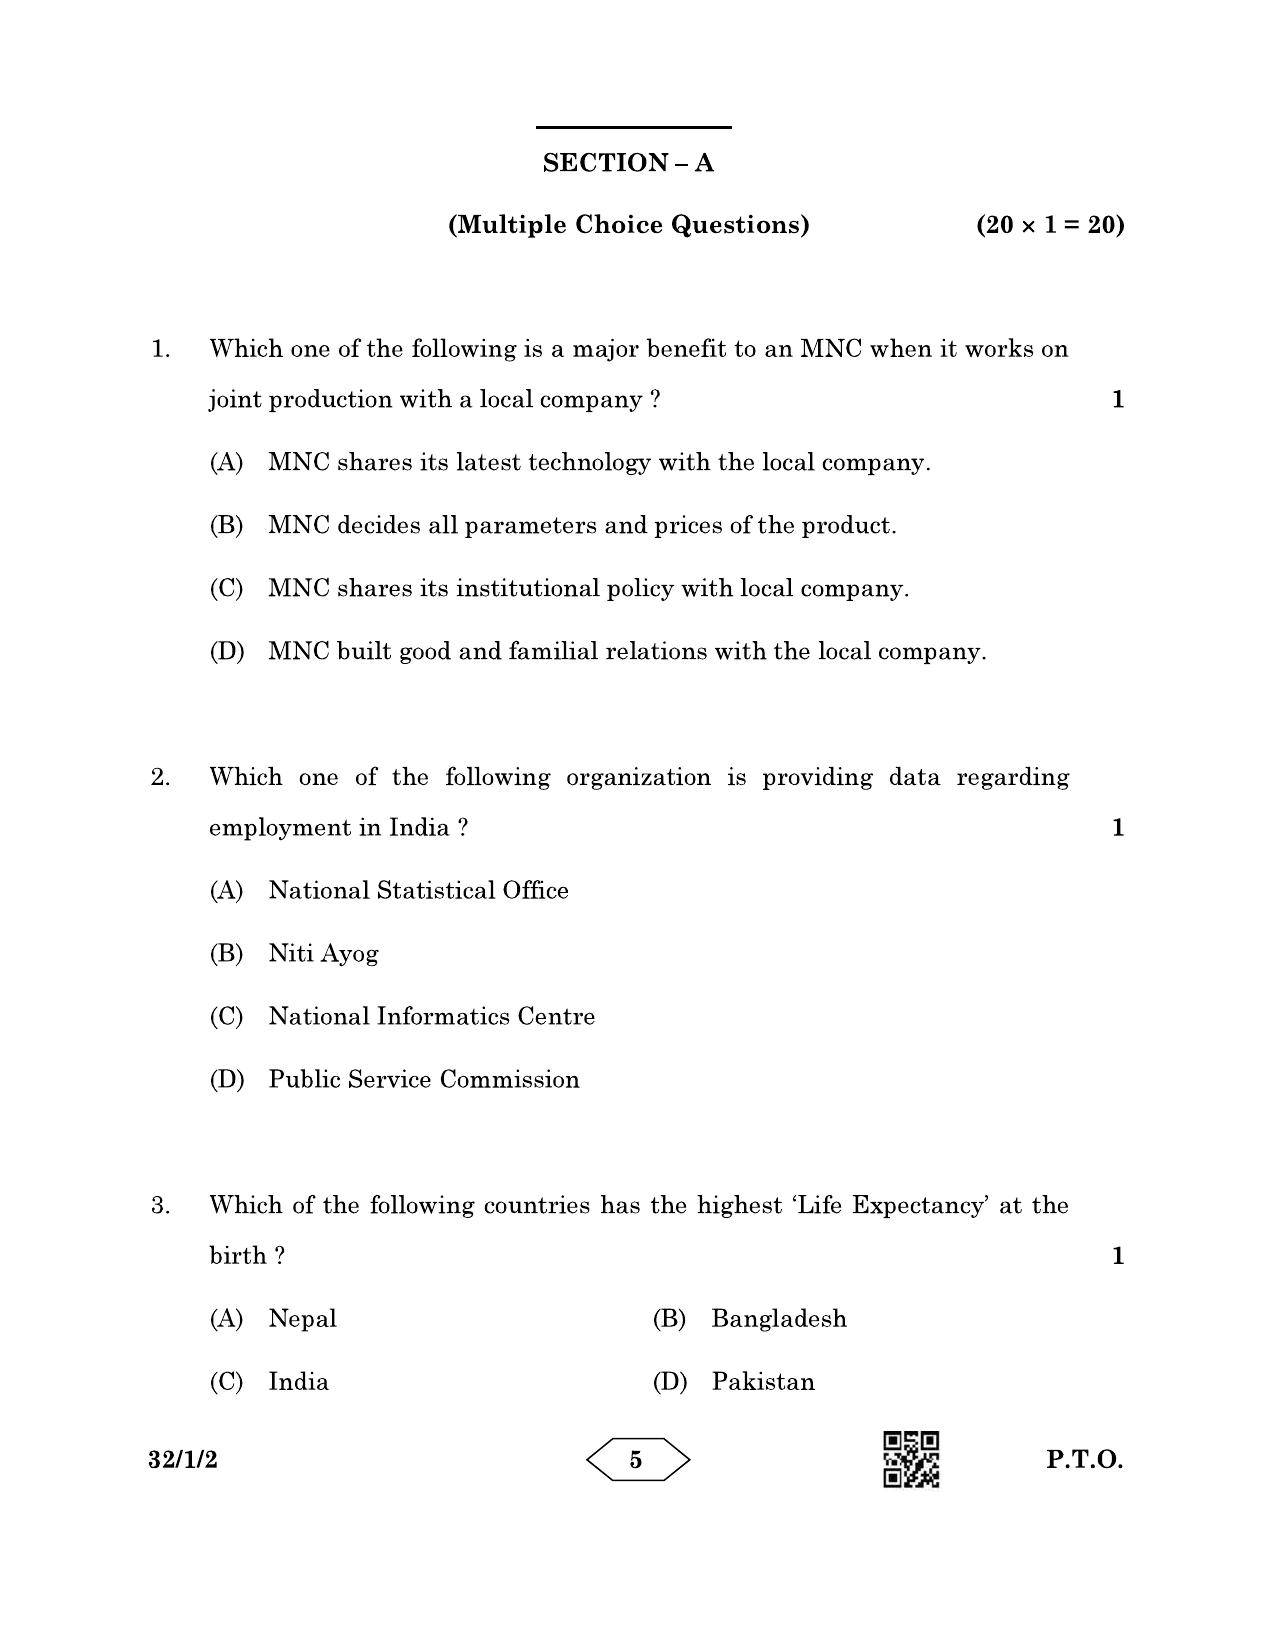 CBSE Class 10 32-1-2 Social Science 2023 Question Paper - Page 5